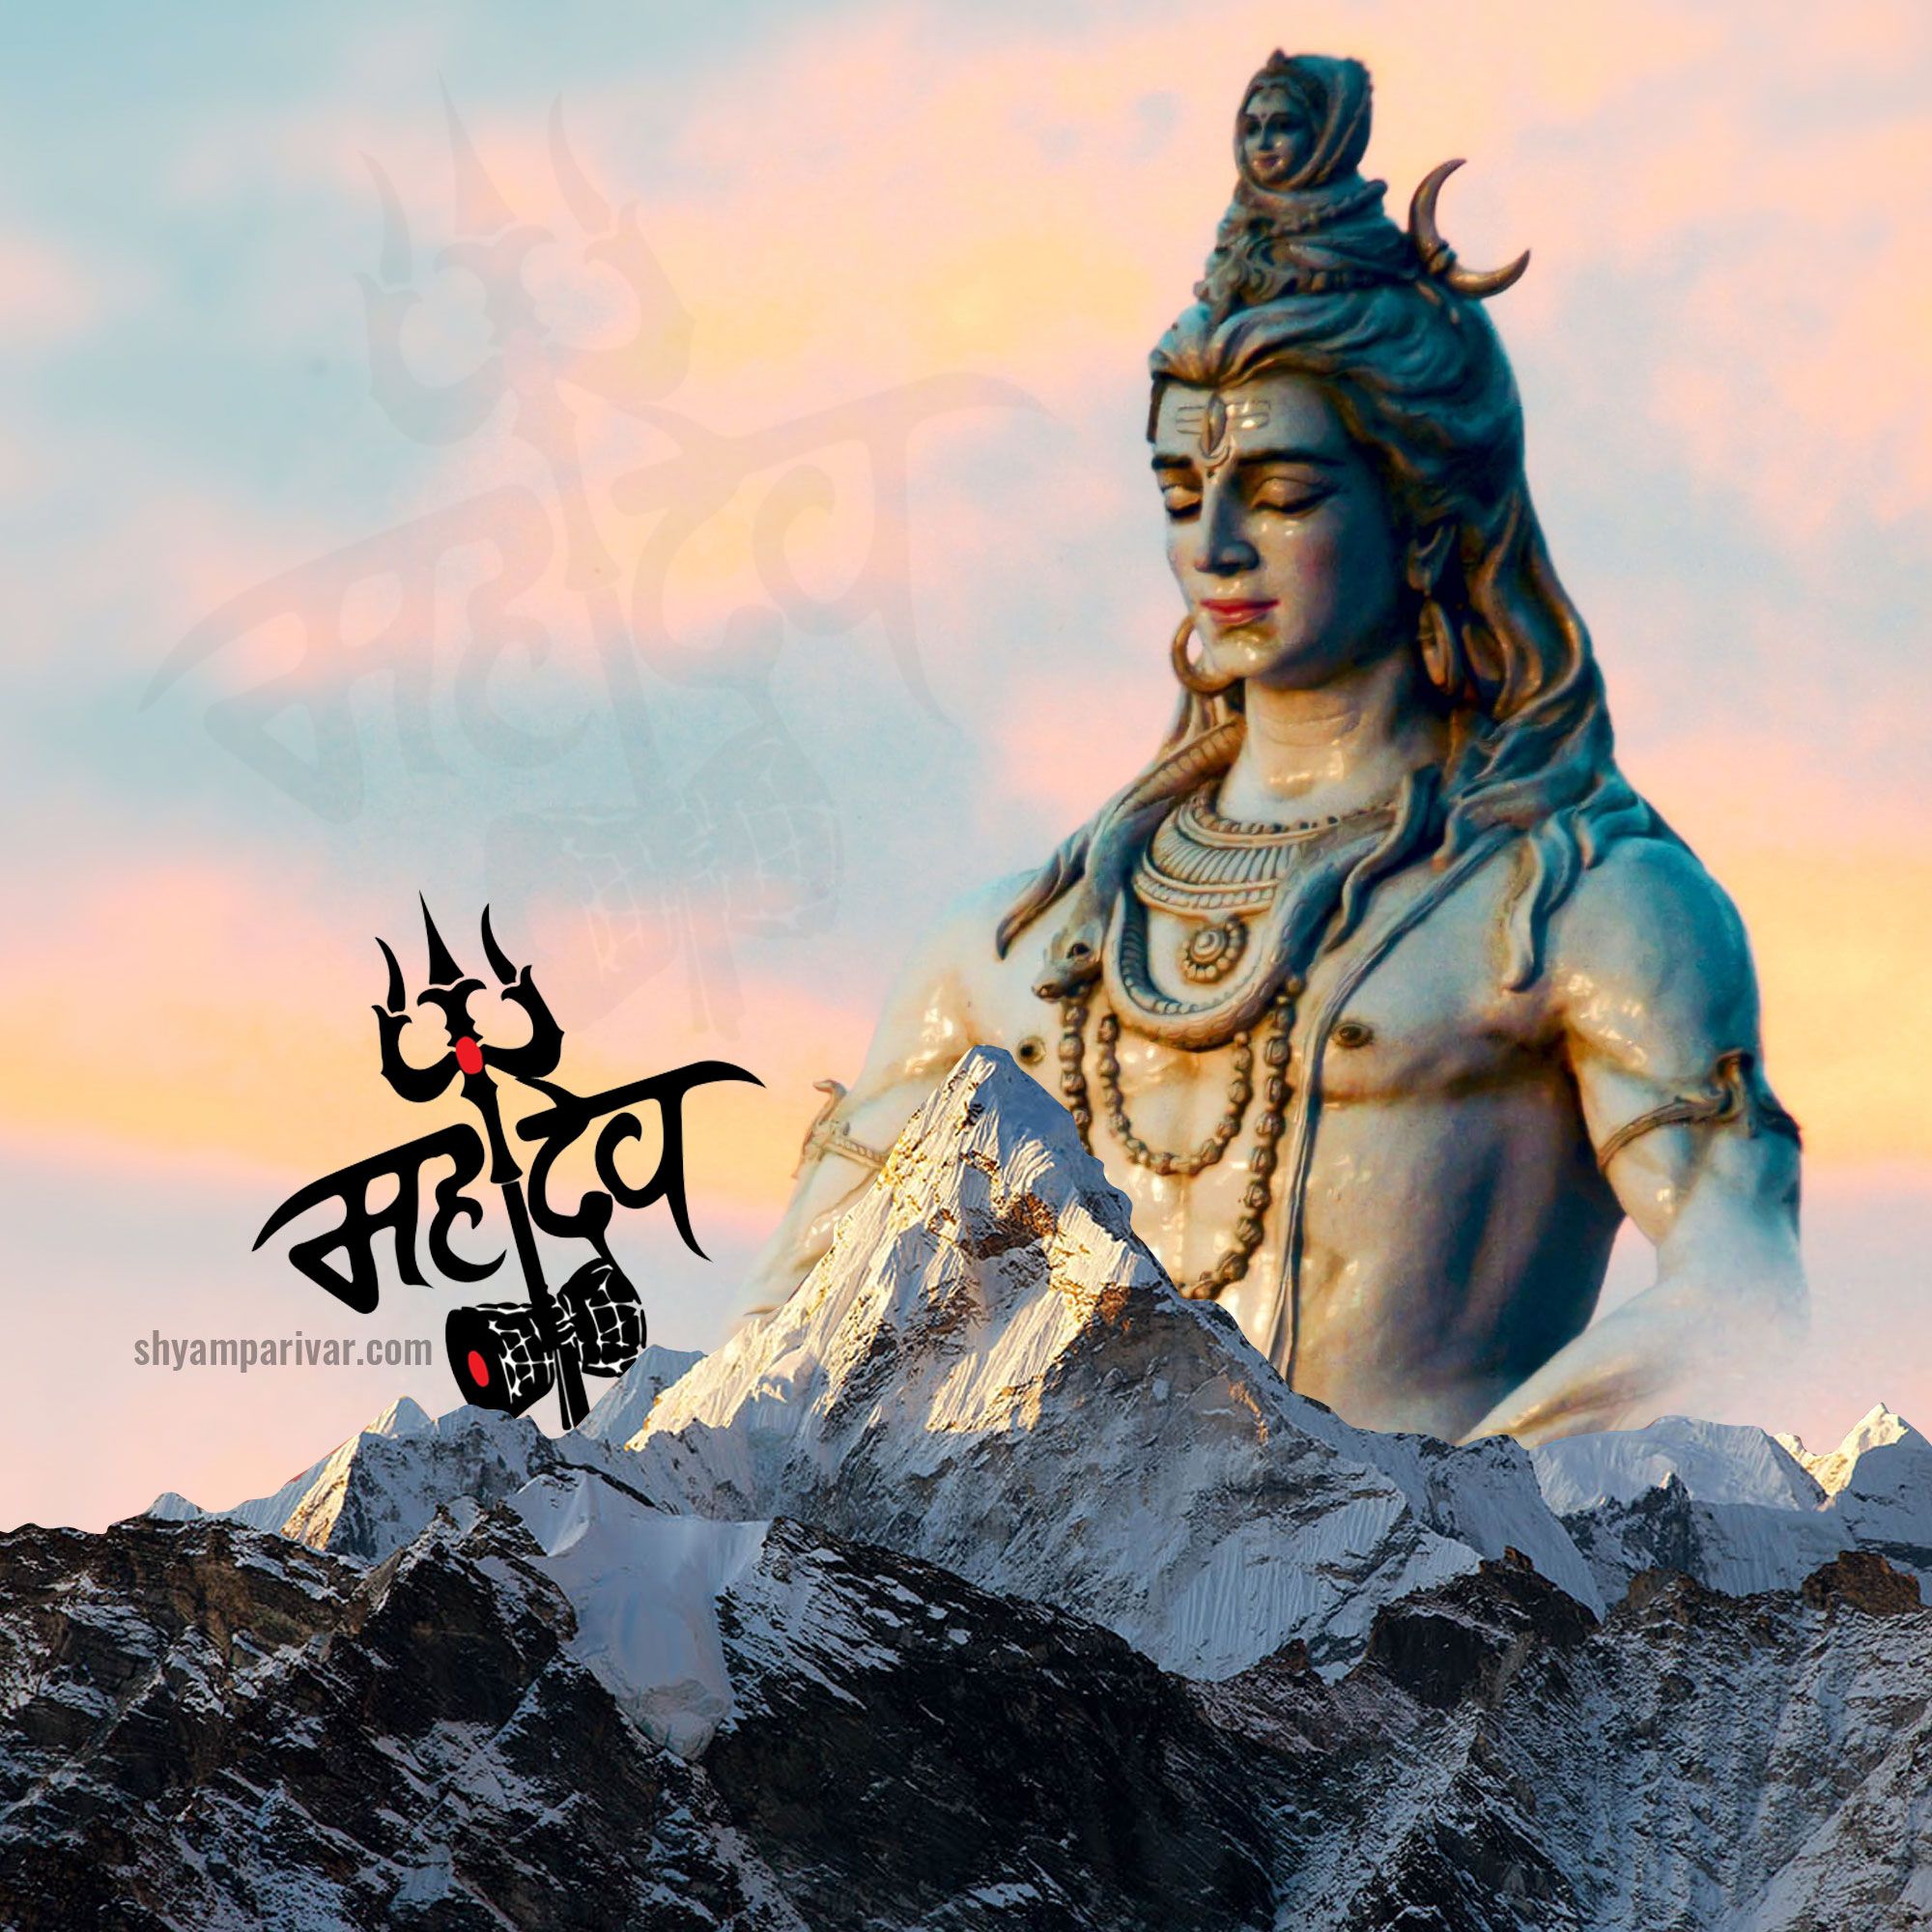 Experience Raw Passion with Bholenath Ringtone Collection